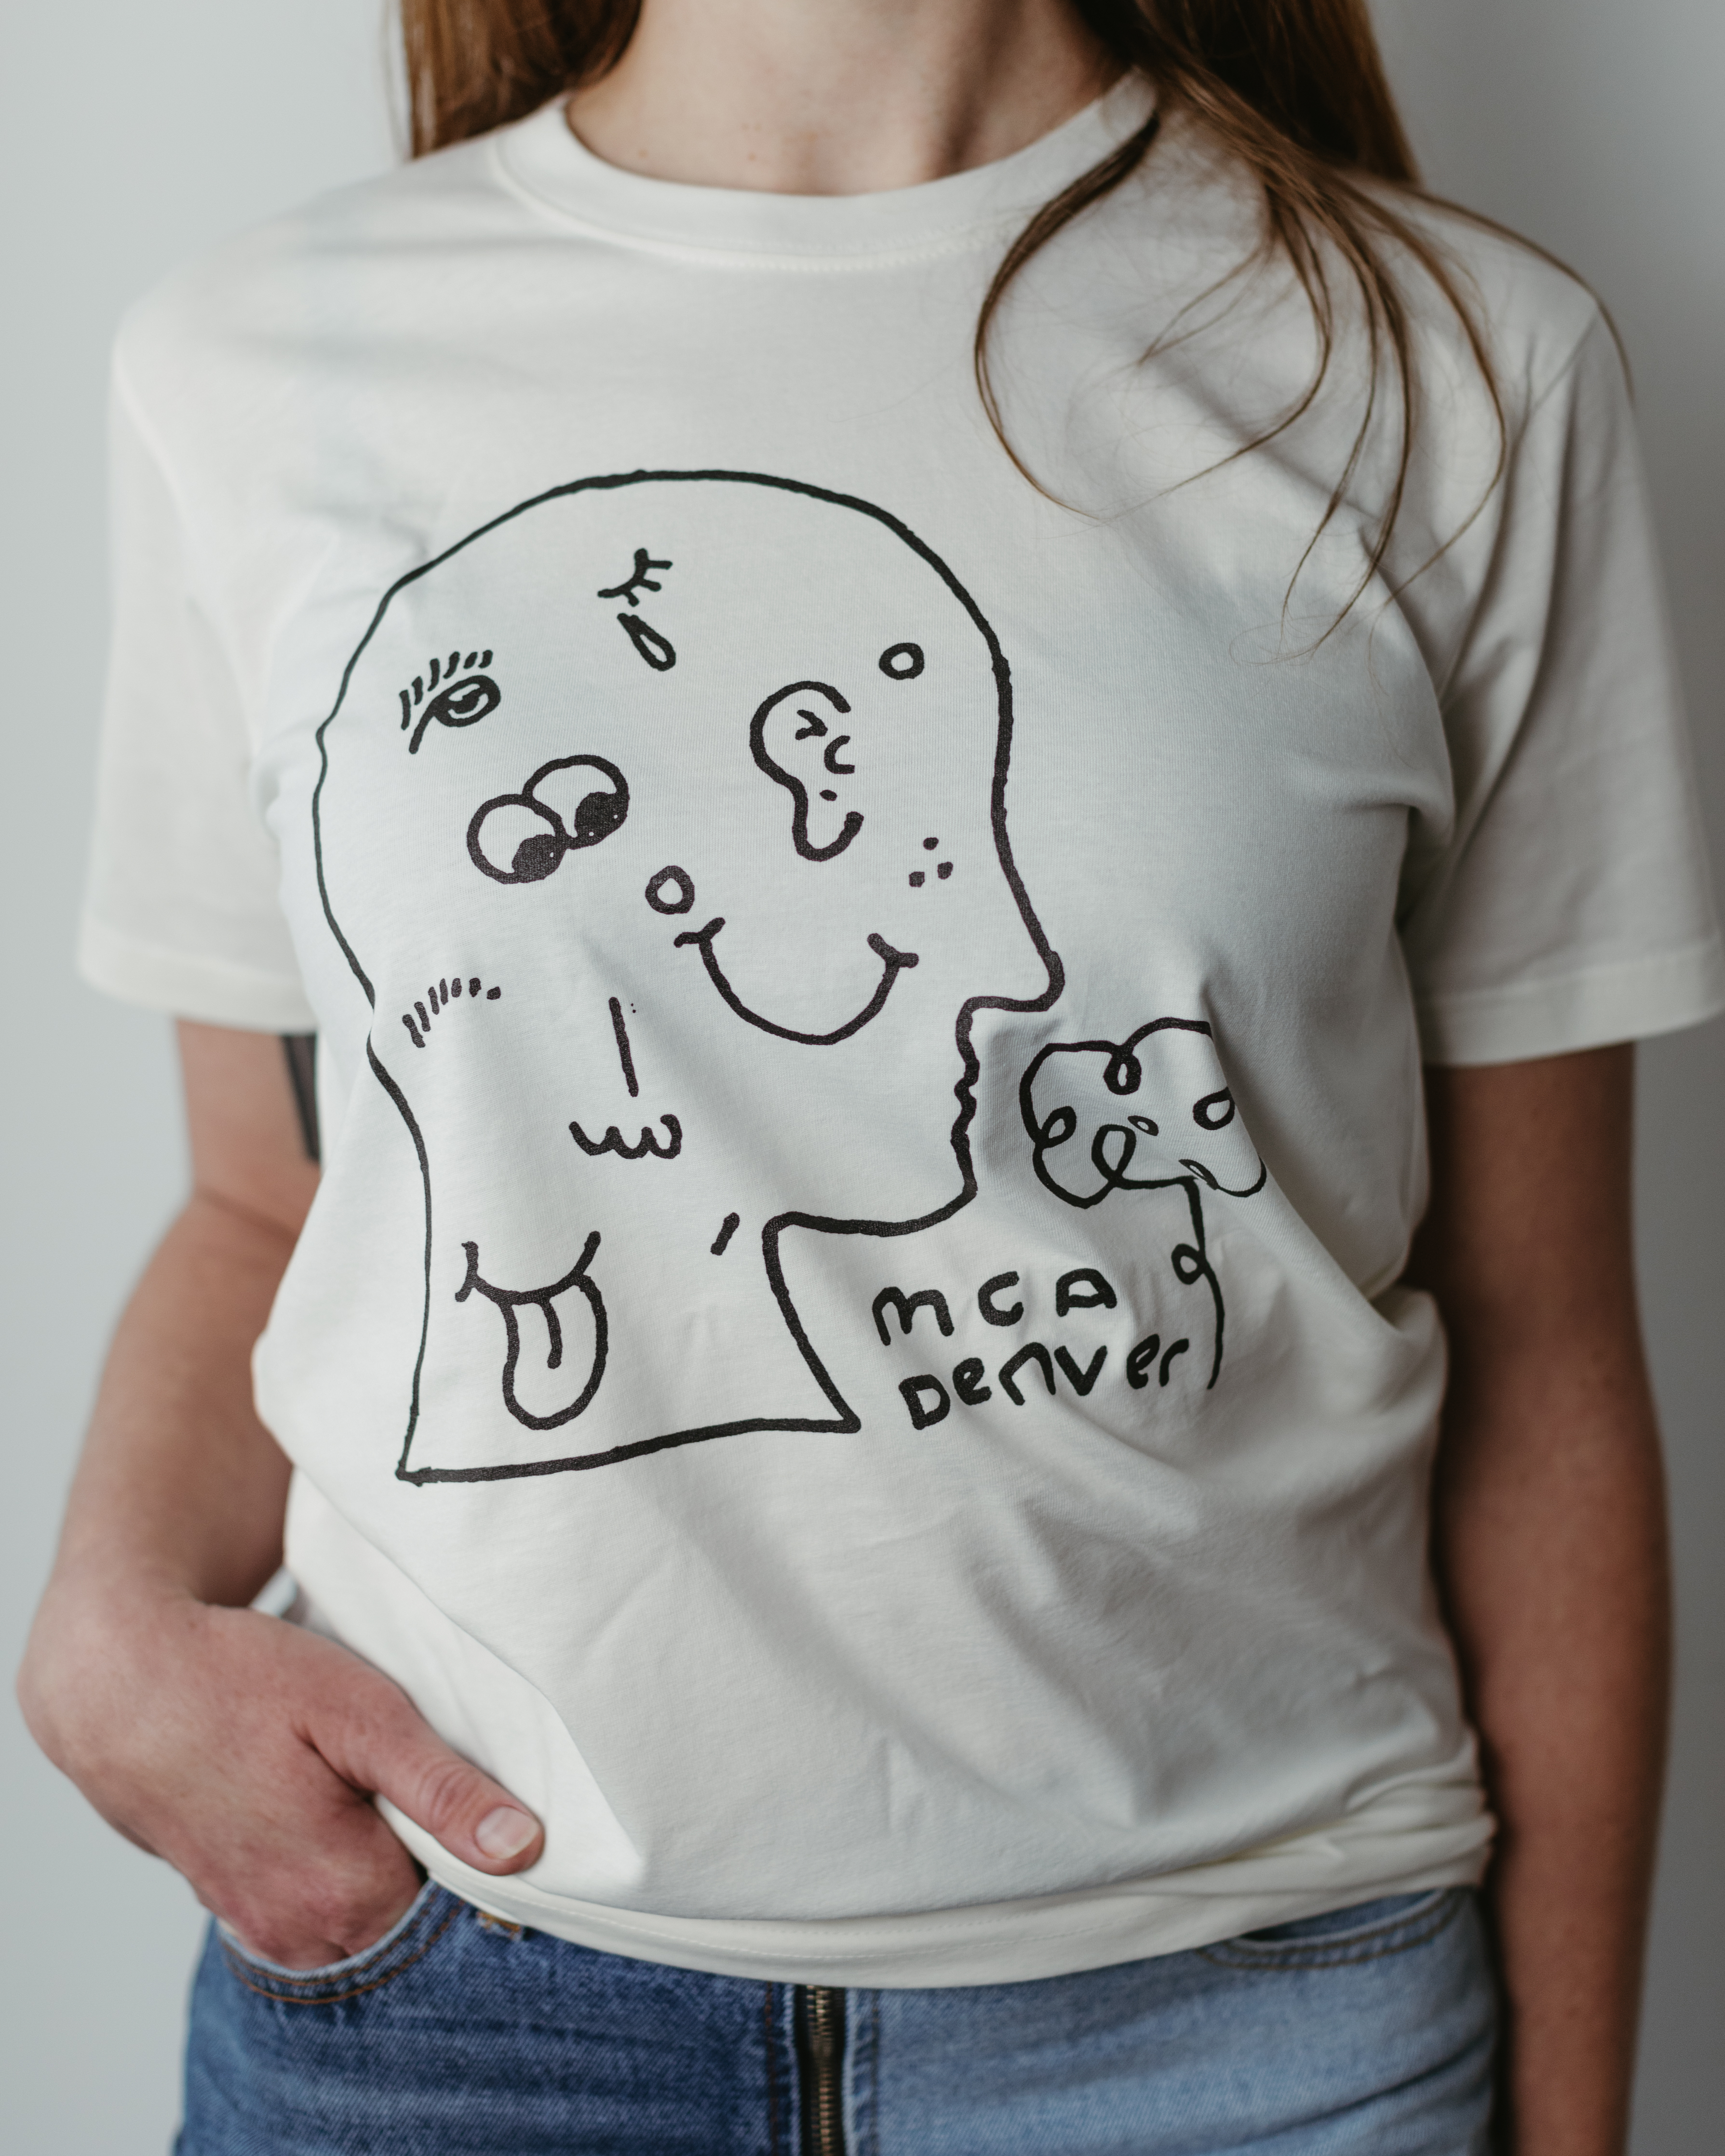 A close up image of a person wearing a white t-shirt with a black and white line drawing of the outline of a human profile on it. There is a small flower near the nose, which makes it look as though the figure on the shirt is smelling the flower. There is text between the flower and the head that reads “MCA Denver”. Inside the head are eyes, an ear, a smiley face, a mouth with a tongue sticking out, and a few other facial features.